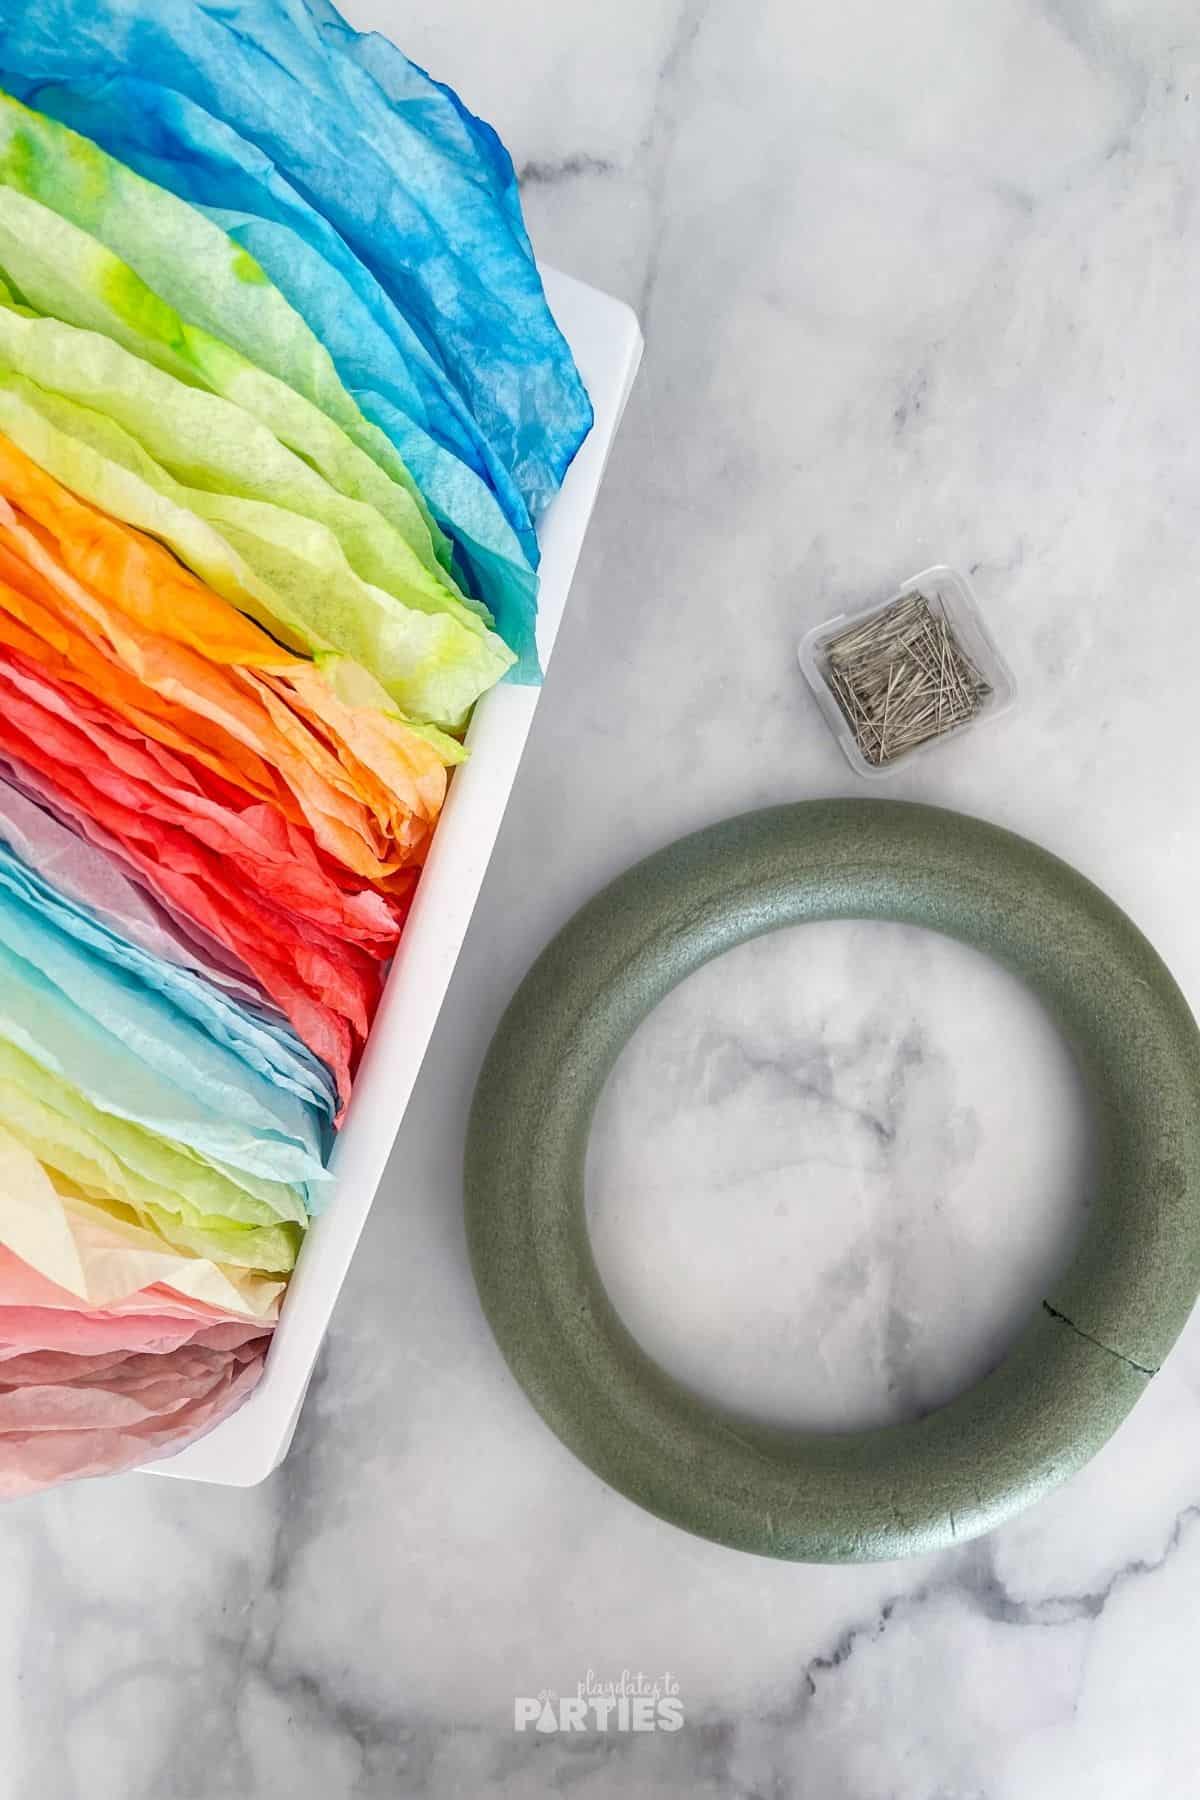 Rainbow dyed coffee filters, foam wreath form, and straight pins on a marble surface.